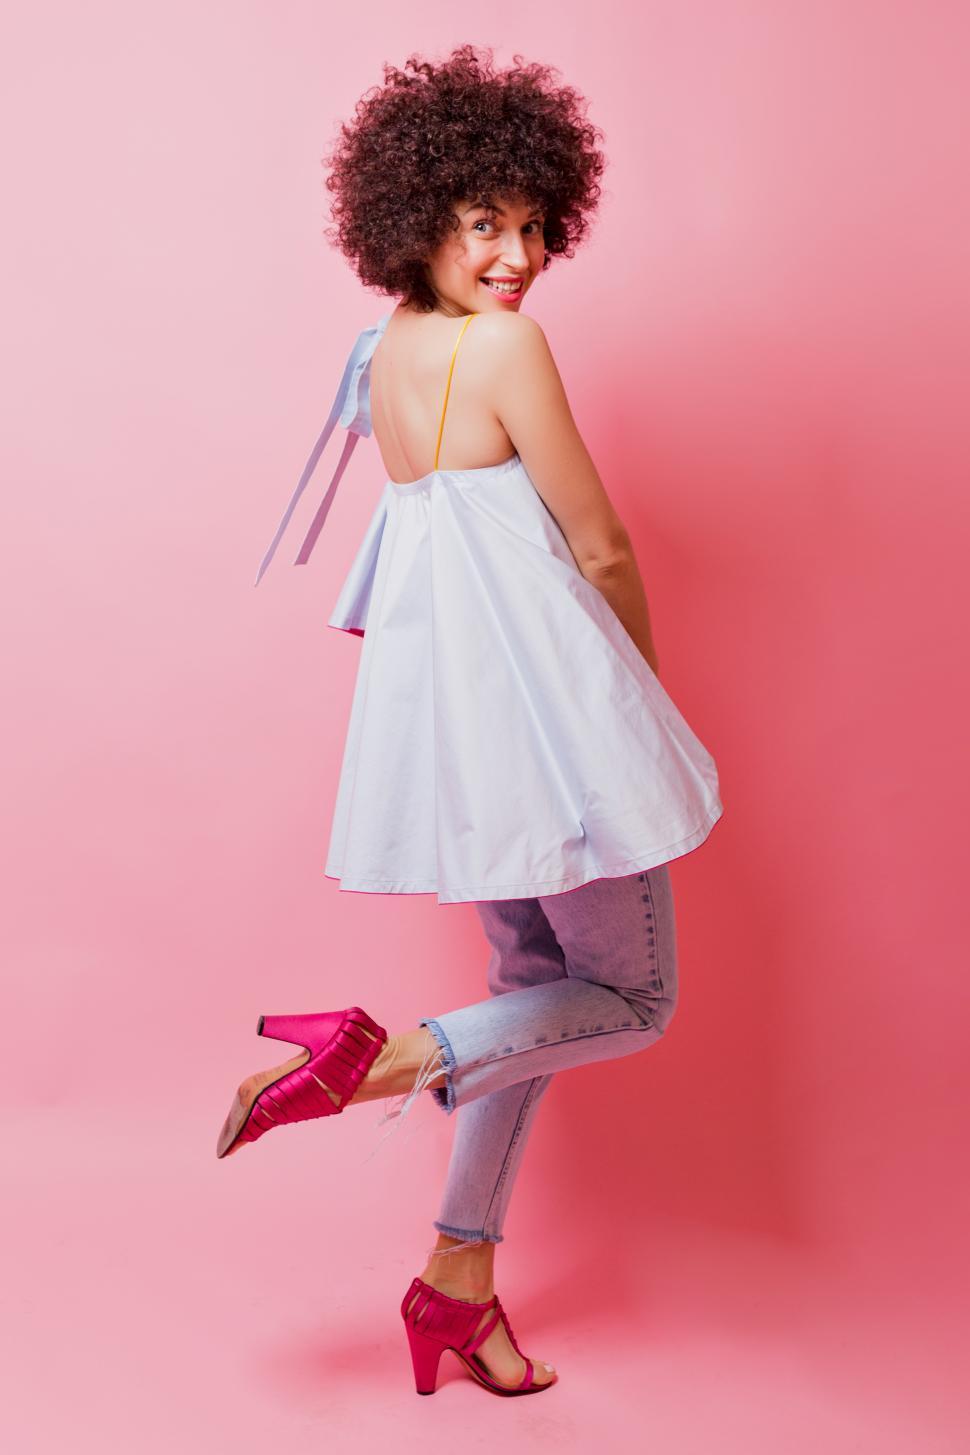 Free Image of Woman with short curly hair dressed blue shirt, jeans and pink heels 